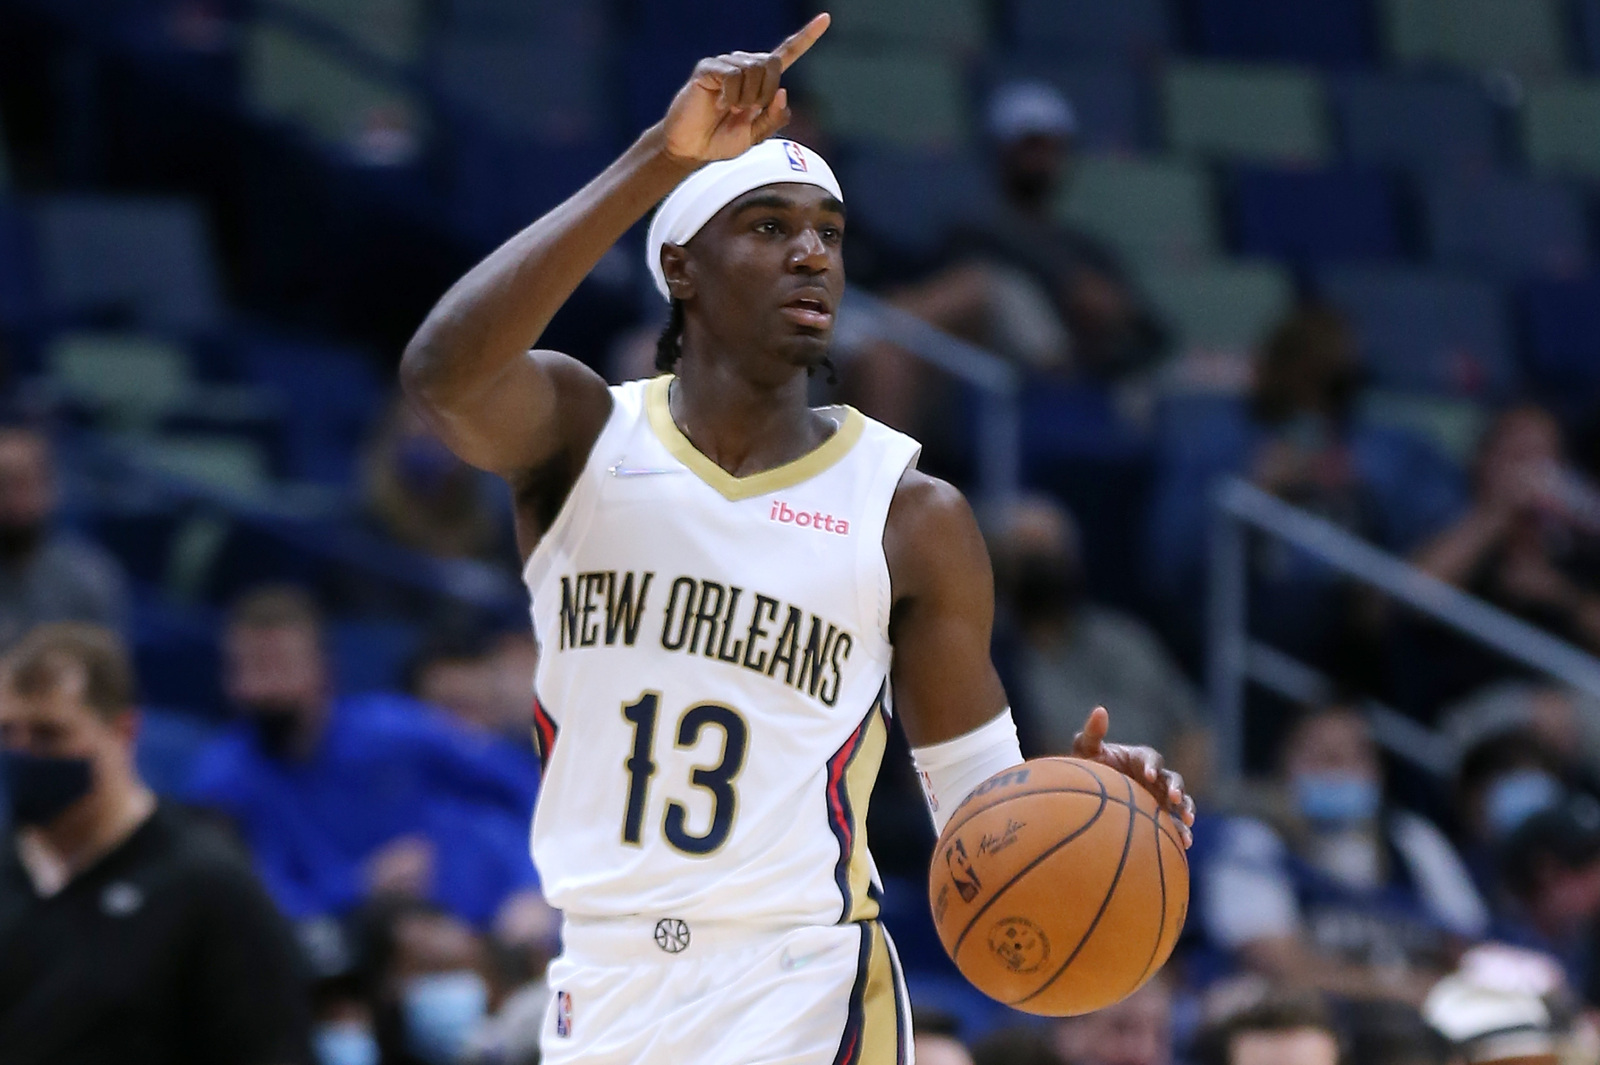 Pelicans guard Kira Lewis Jr. out for season with torn ACL